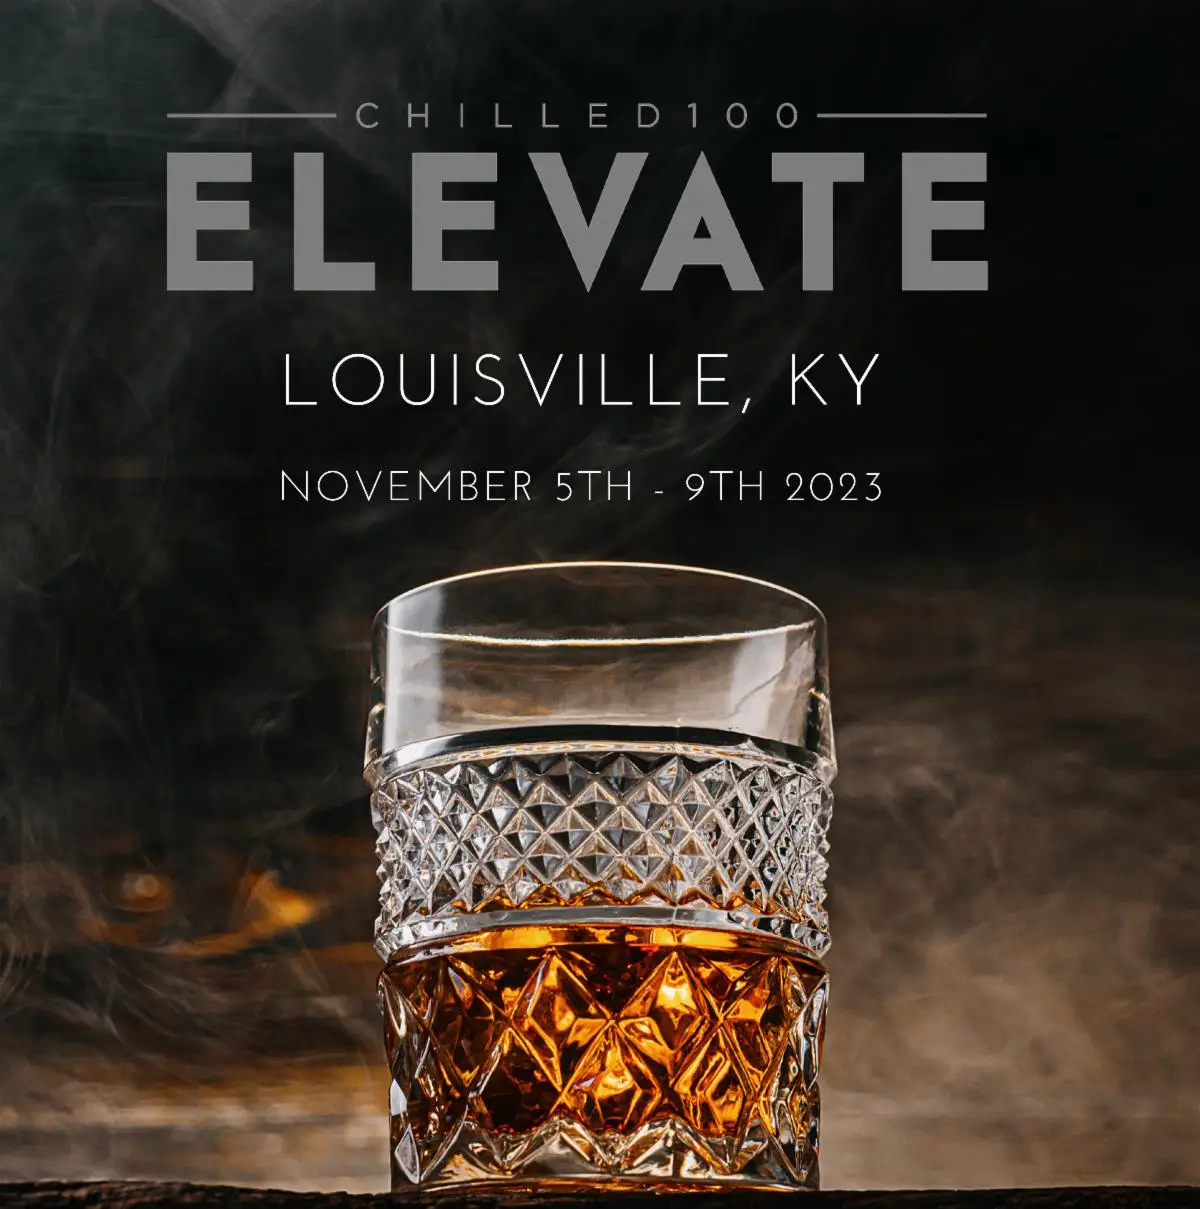 Look Who’s Coming To ELEVATE Louisville 2023!